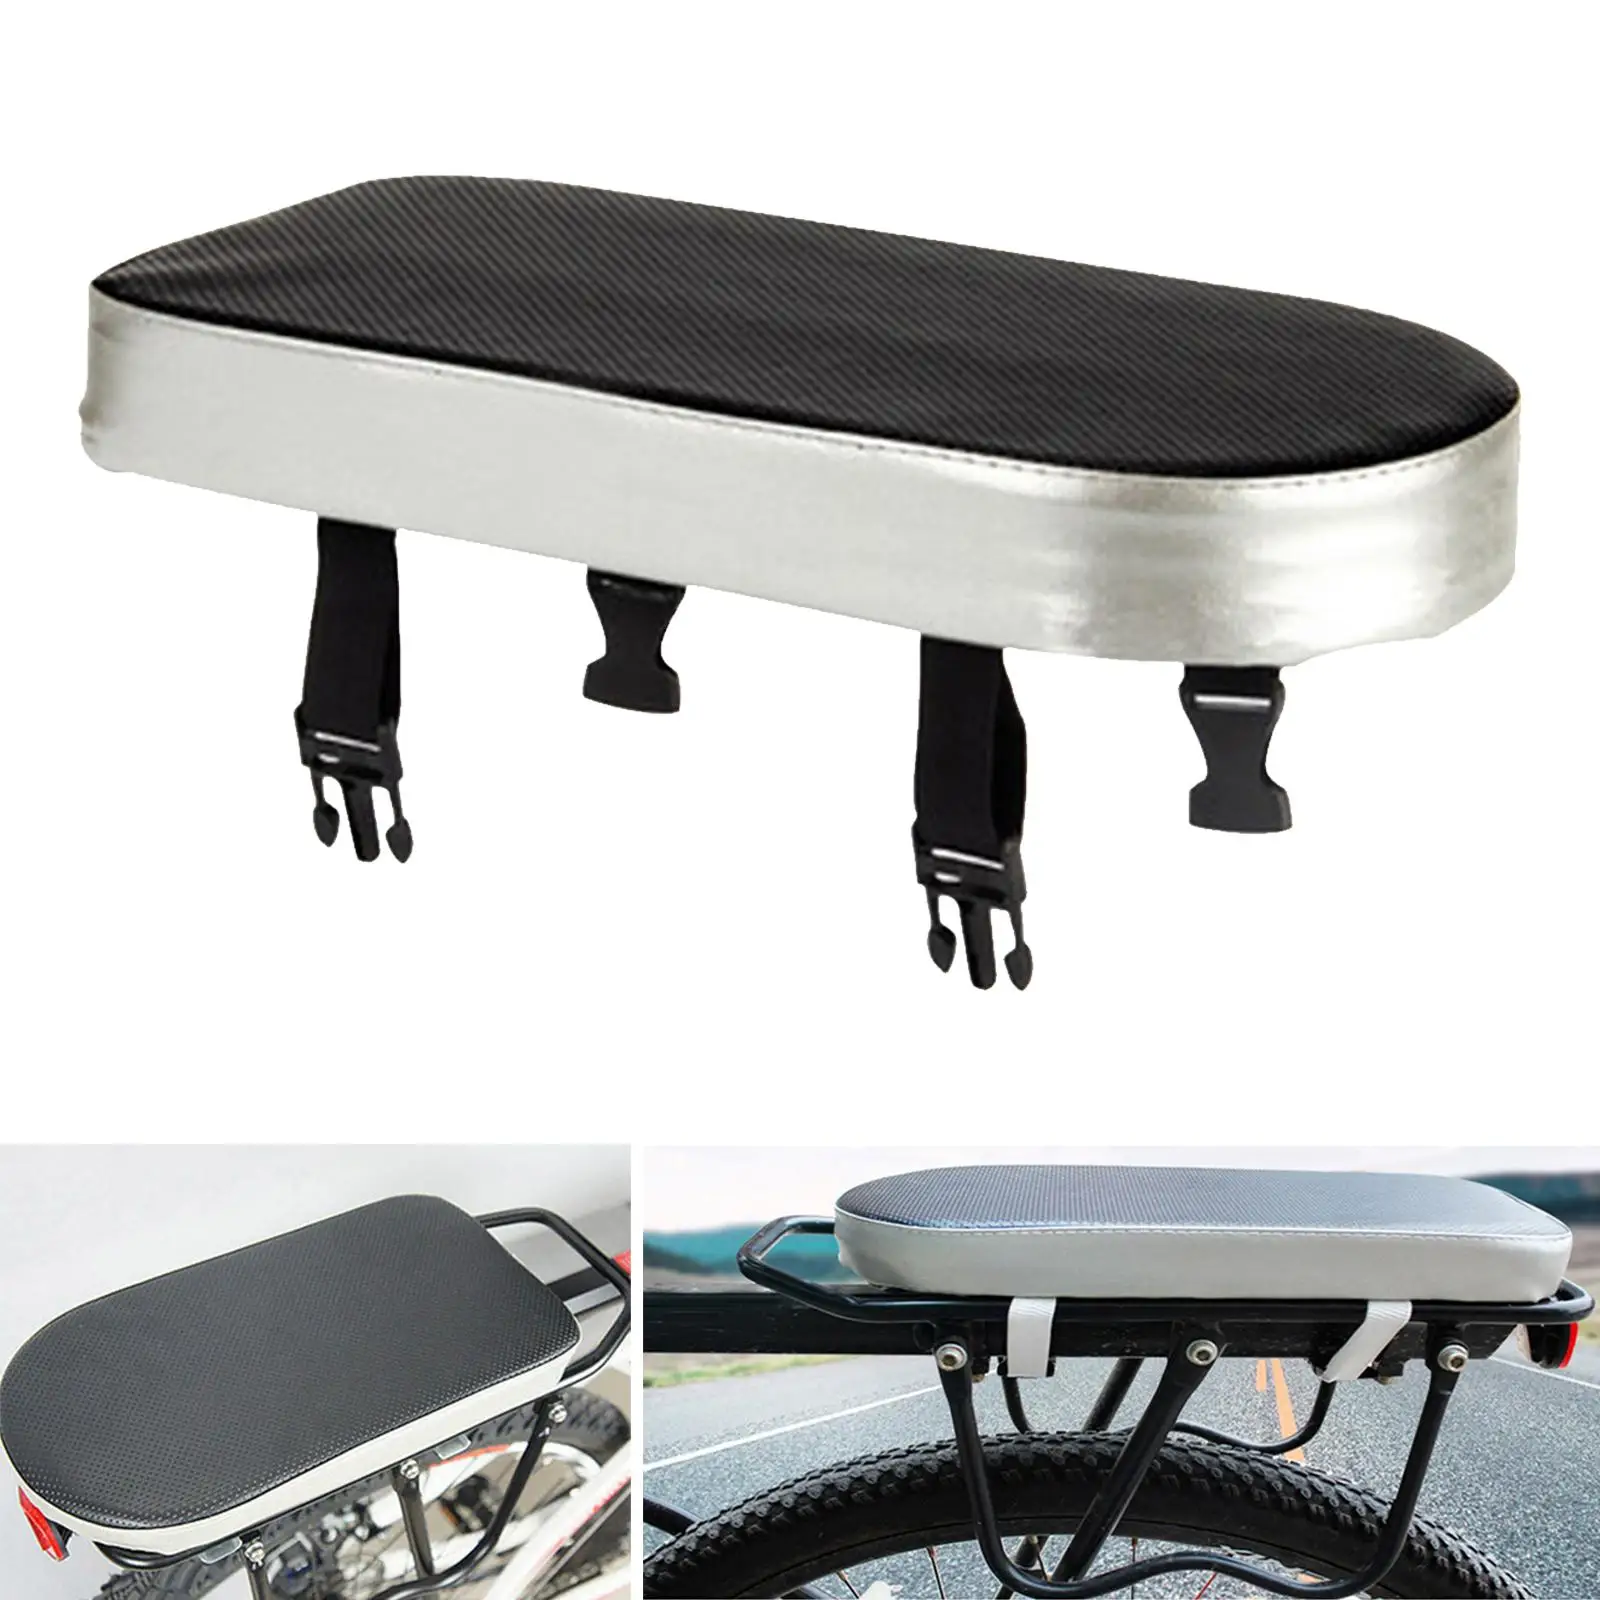 Bike Bicycle Manned Cushion Extra Comfort Pad Breathable Wide Big Soft Back Seat